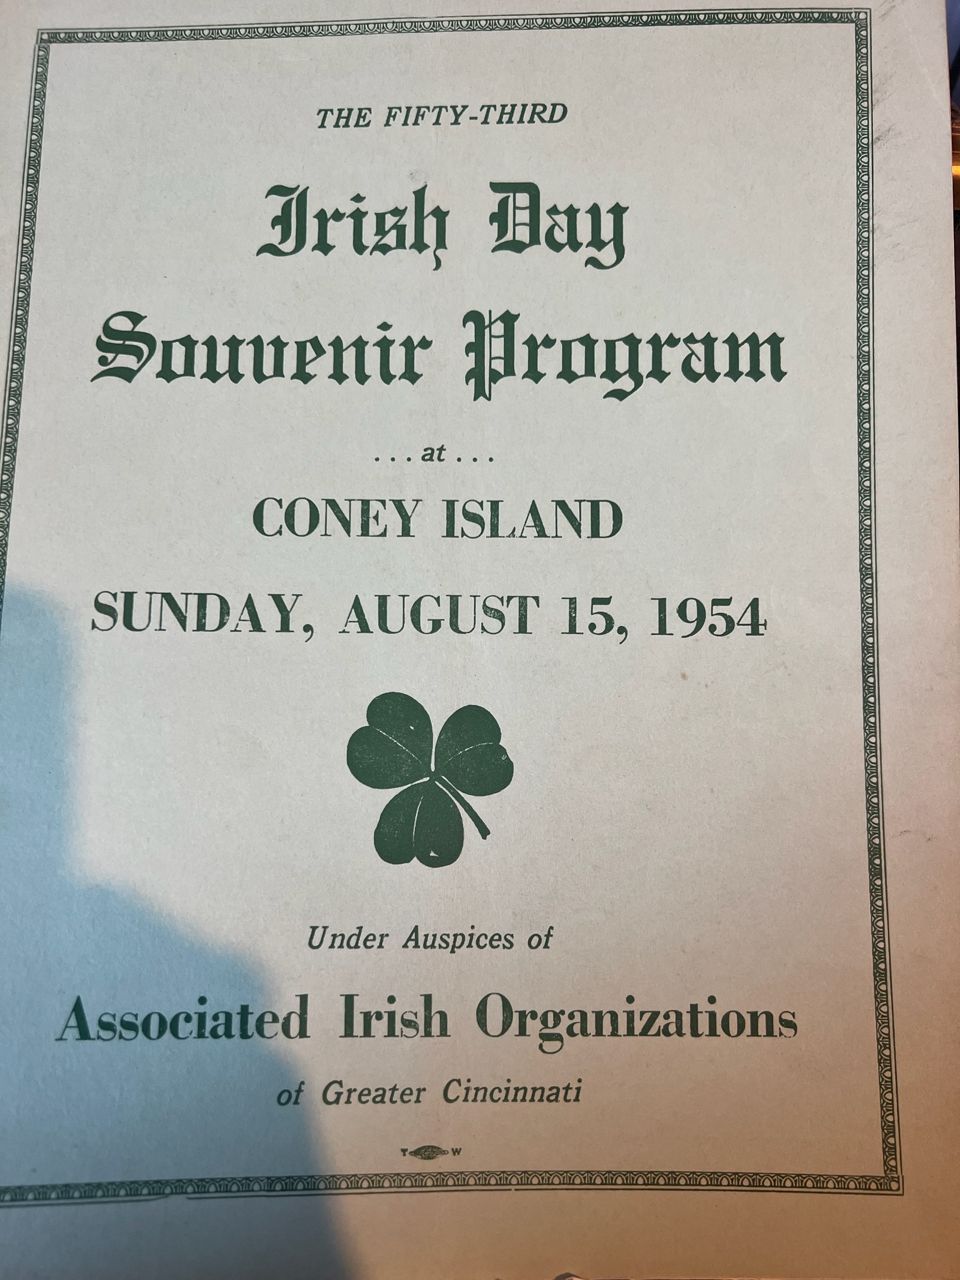 A program from an Irish Day event in Cincinnati in 1954. (Photo courtesy of Patrick Ormond)